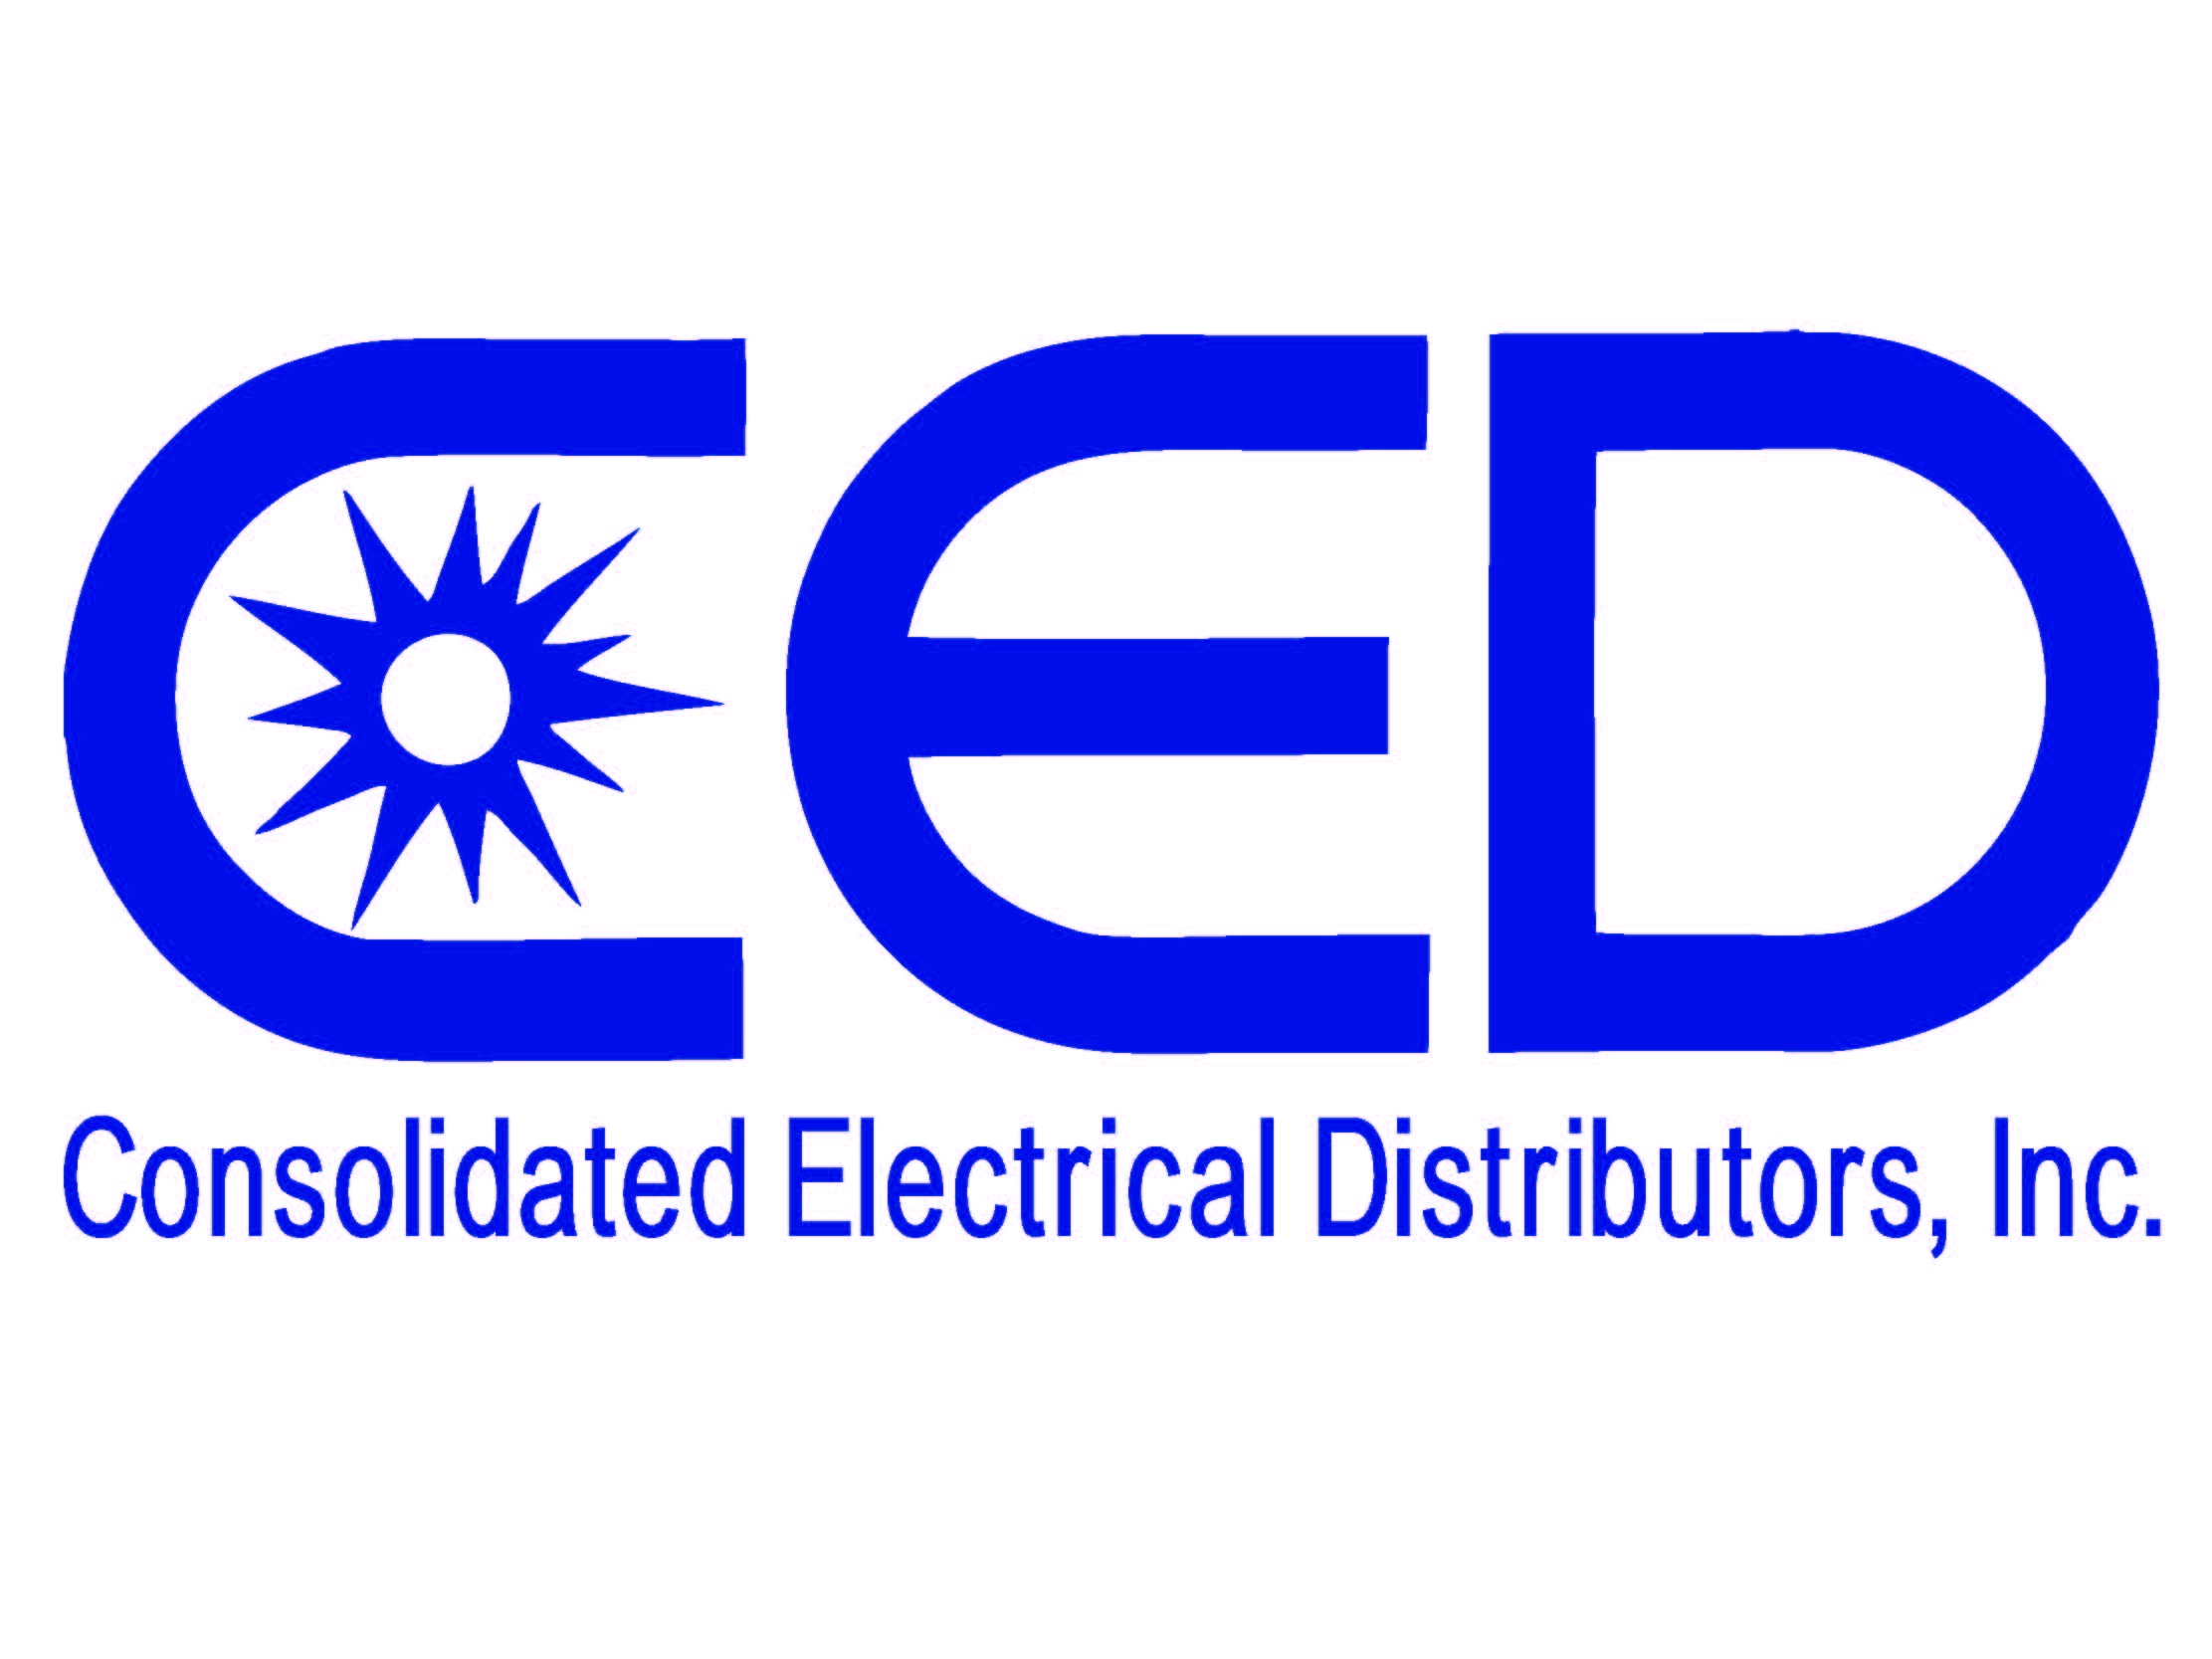 Consolidated Electrical Distributors logo